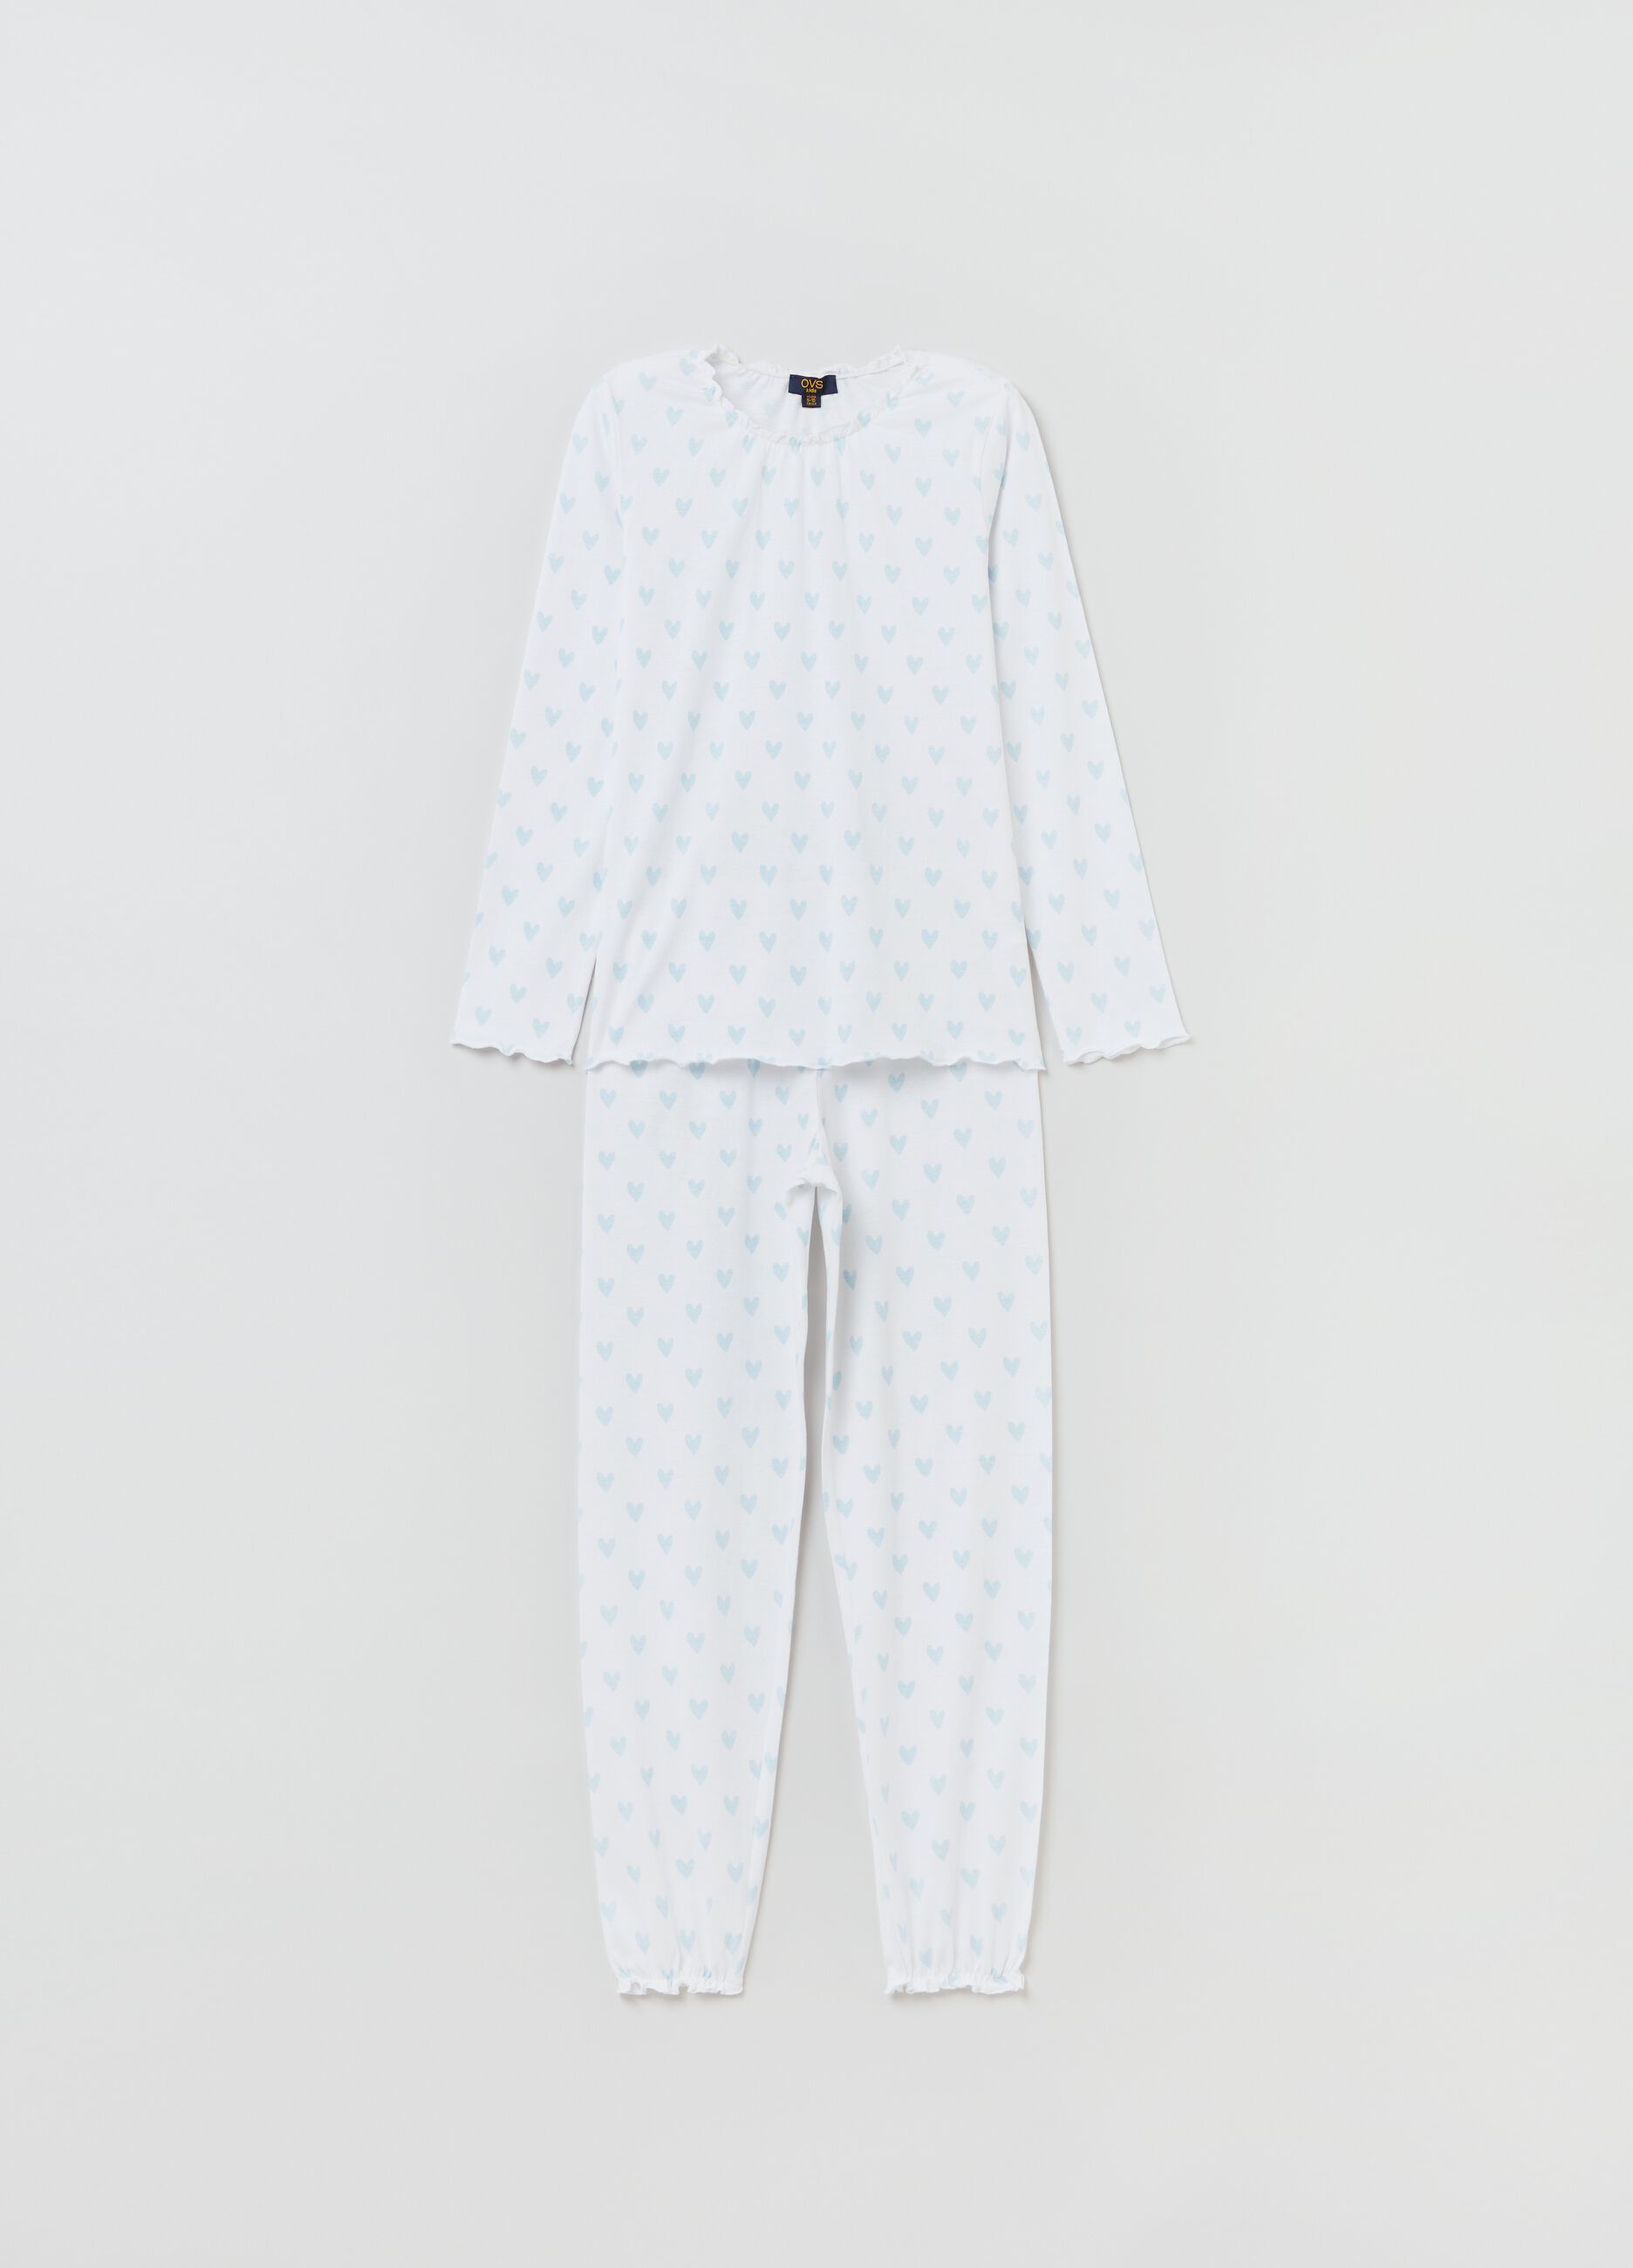 Long pyjamas in cotton with hearts print